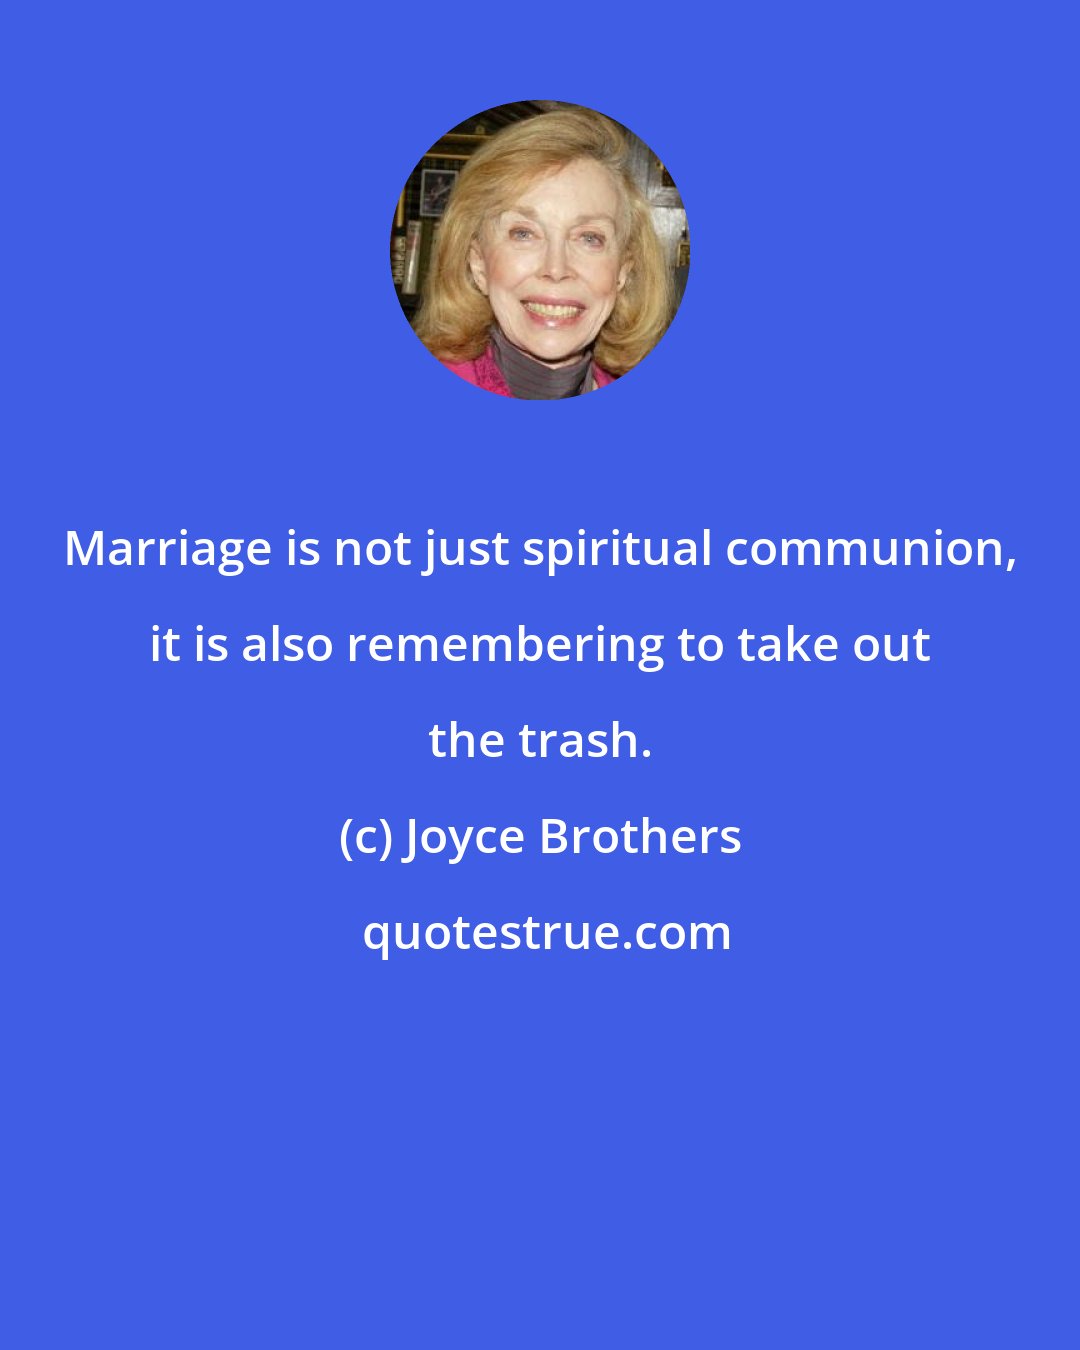 Joyce Brothers: Marriage is not just spiritual communion, it is also remembering to take out the trash.